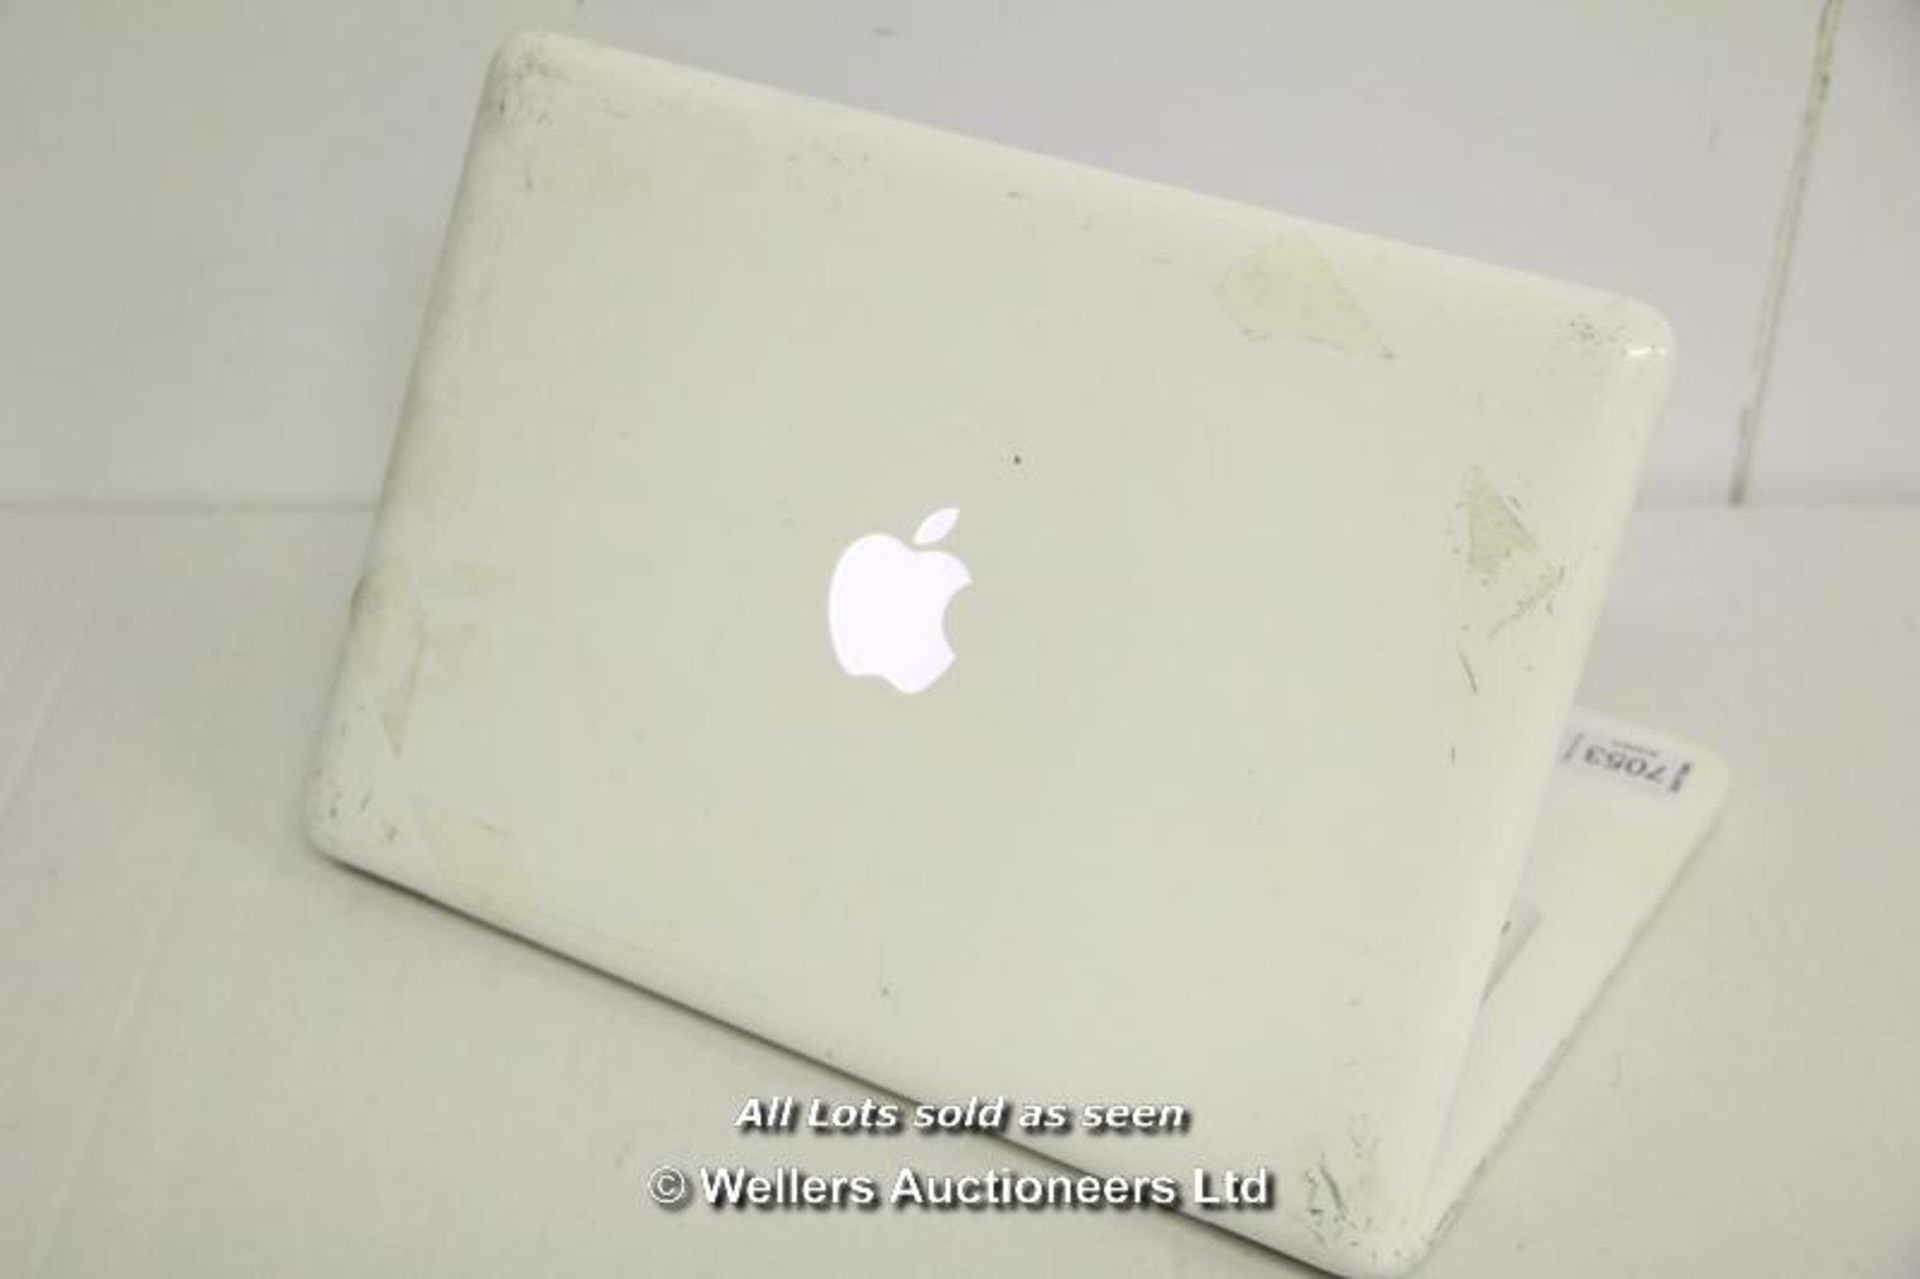 APPLE MACBOOK WHITE 13"(LATE 2009) / MAC OS 10.6.3 SNOW LEAPORD / INTEL CORE 2 DUO 2.26GHZ / 2GB RAM - Image 2 of 3